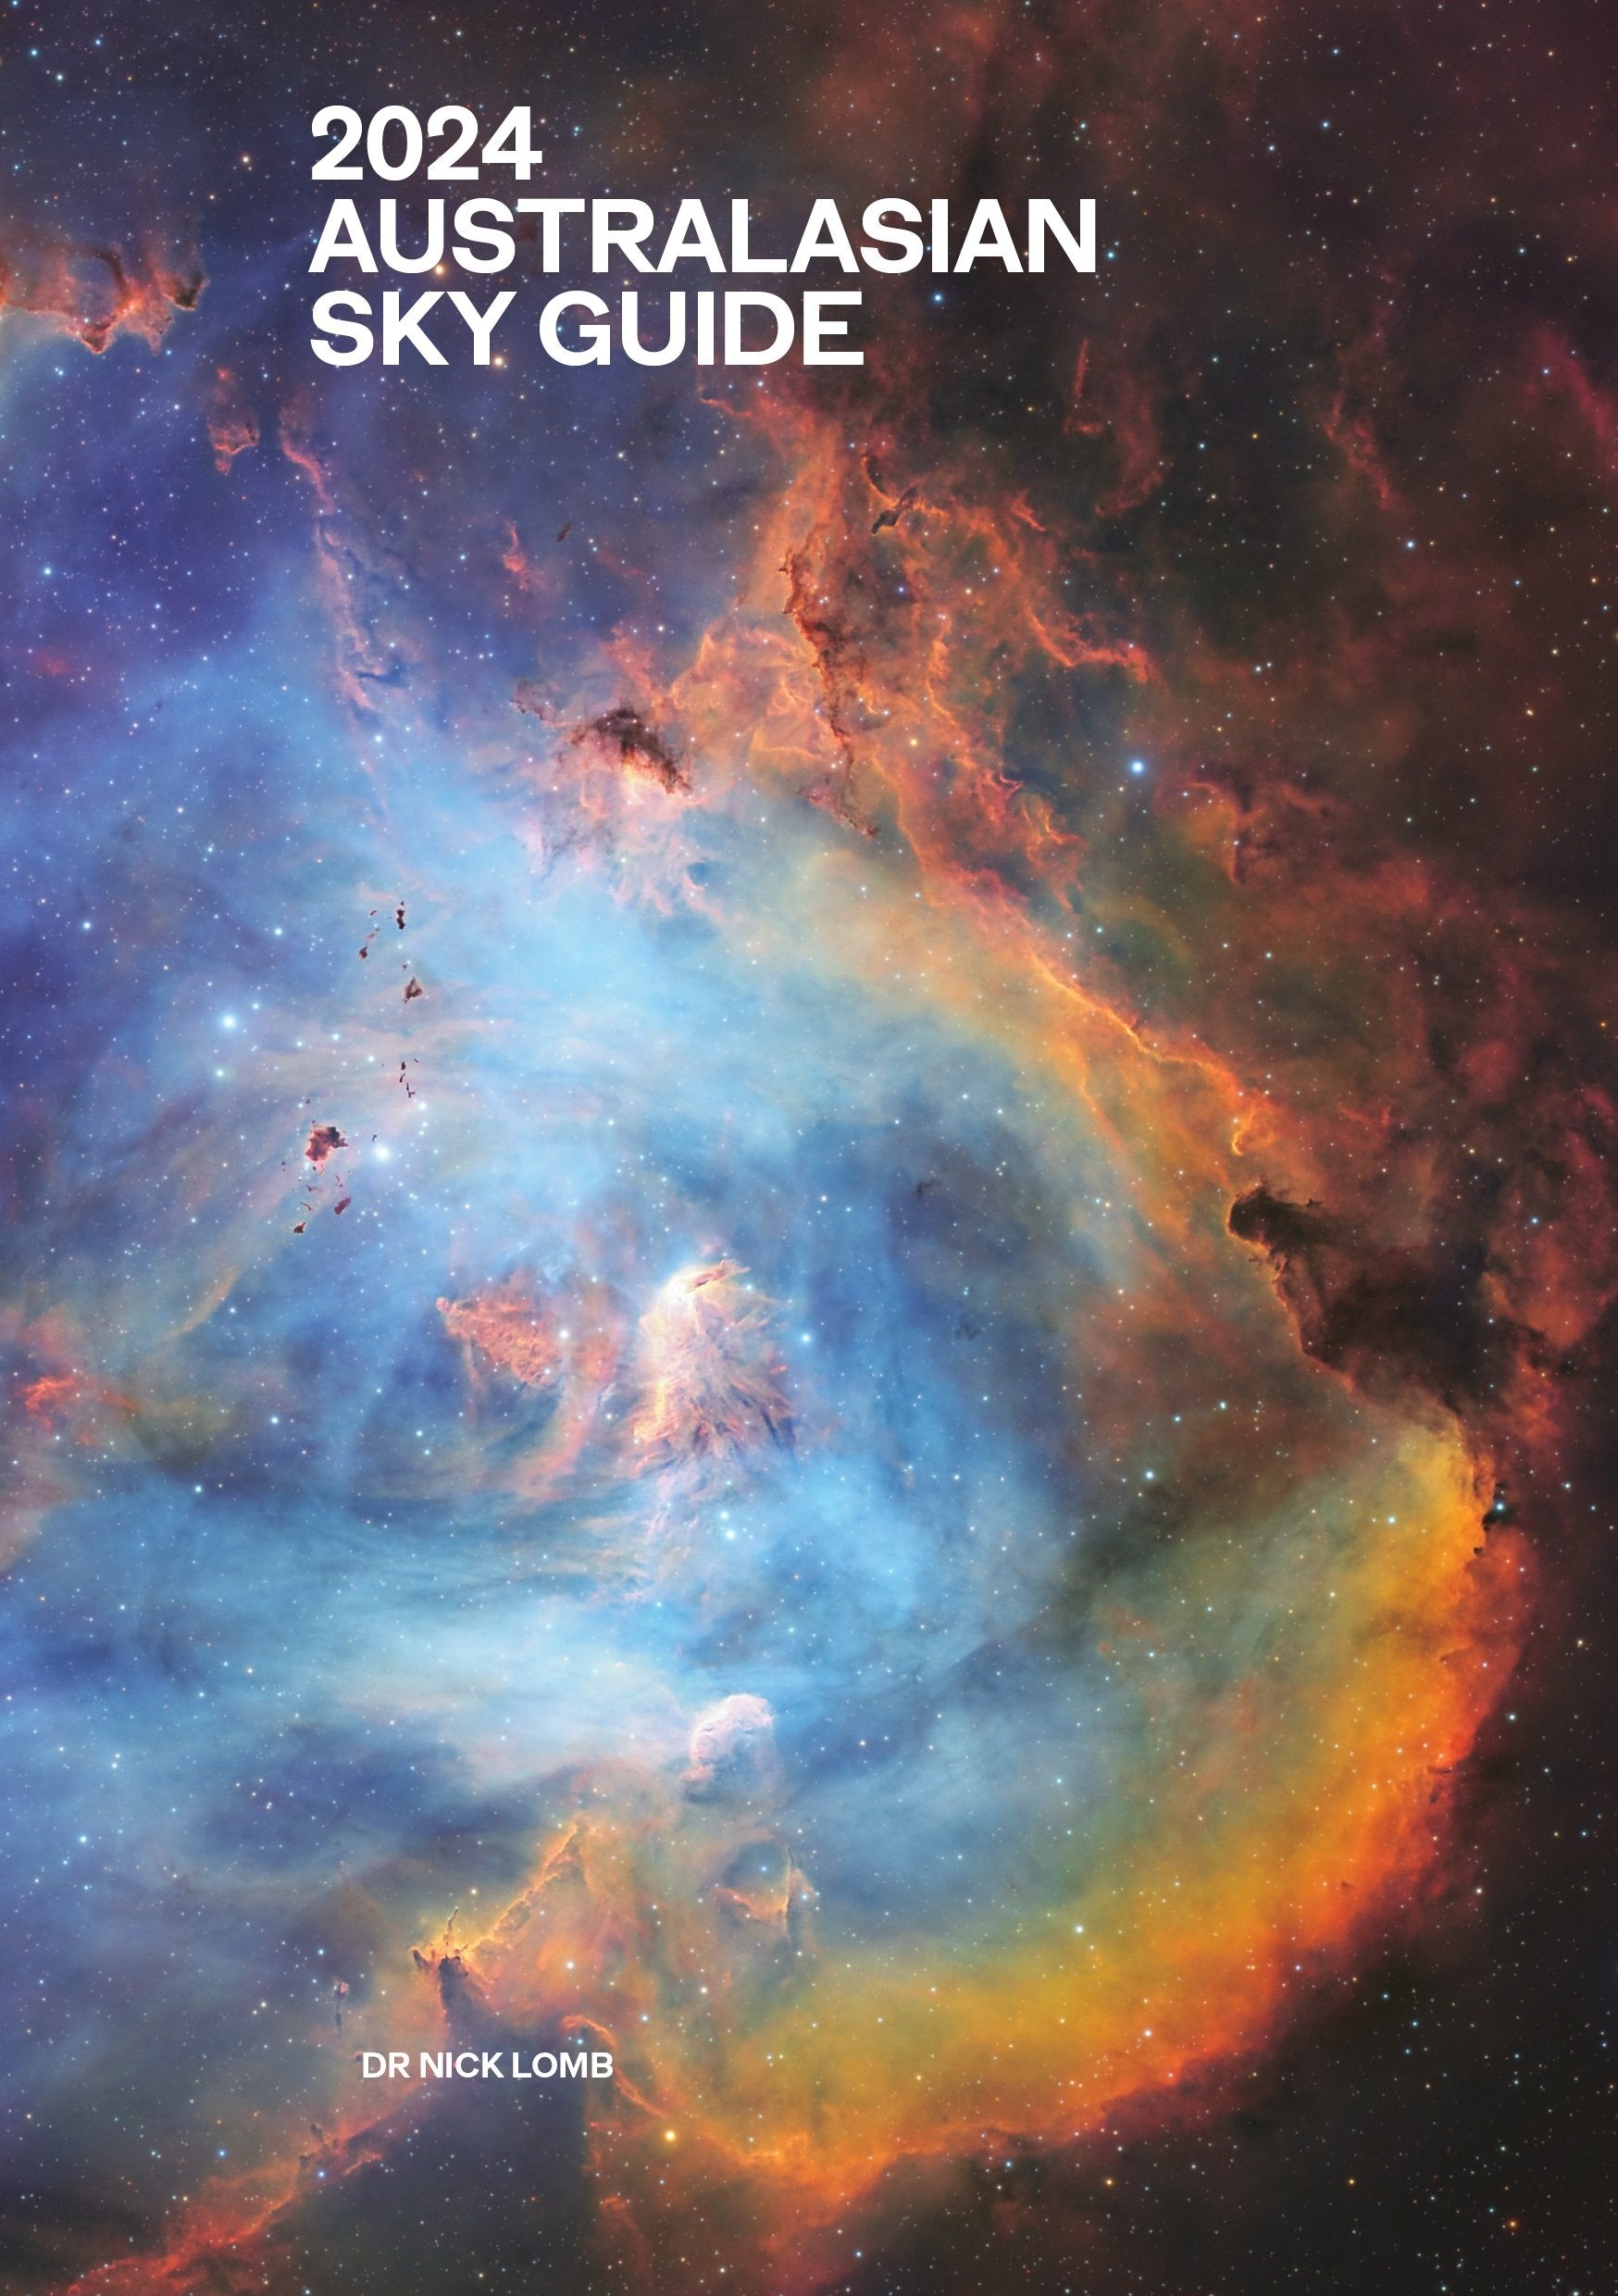 2024 Australasian Sky Guide by Nick Lomb